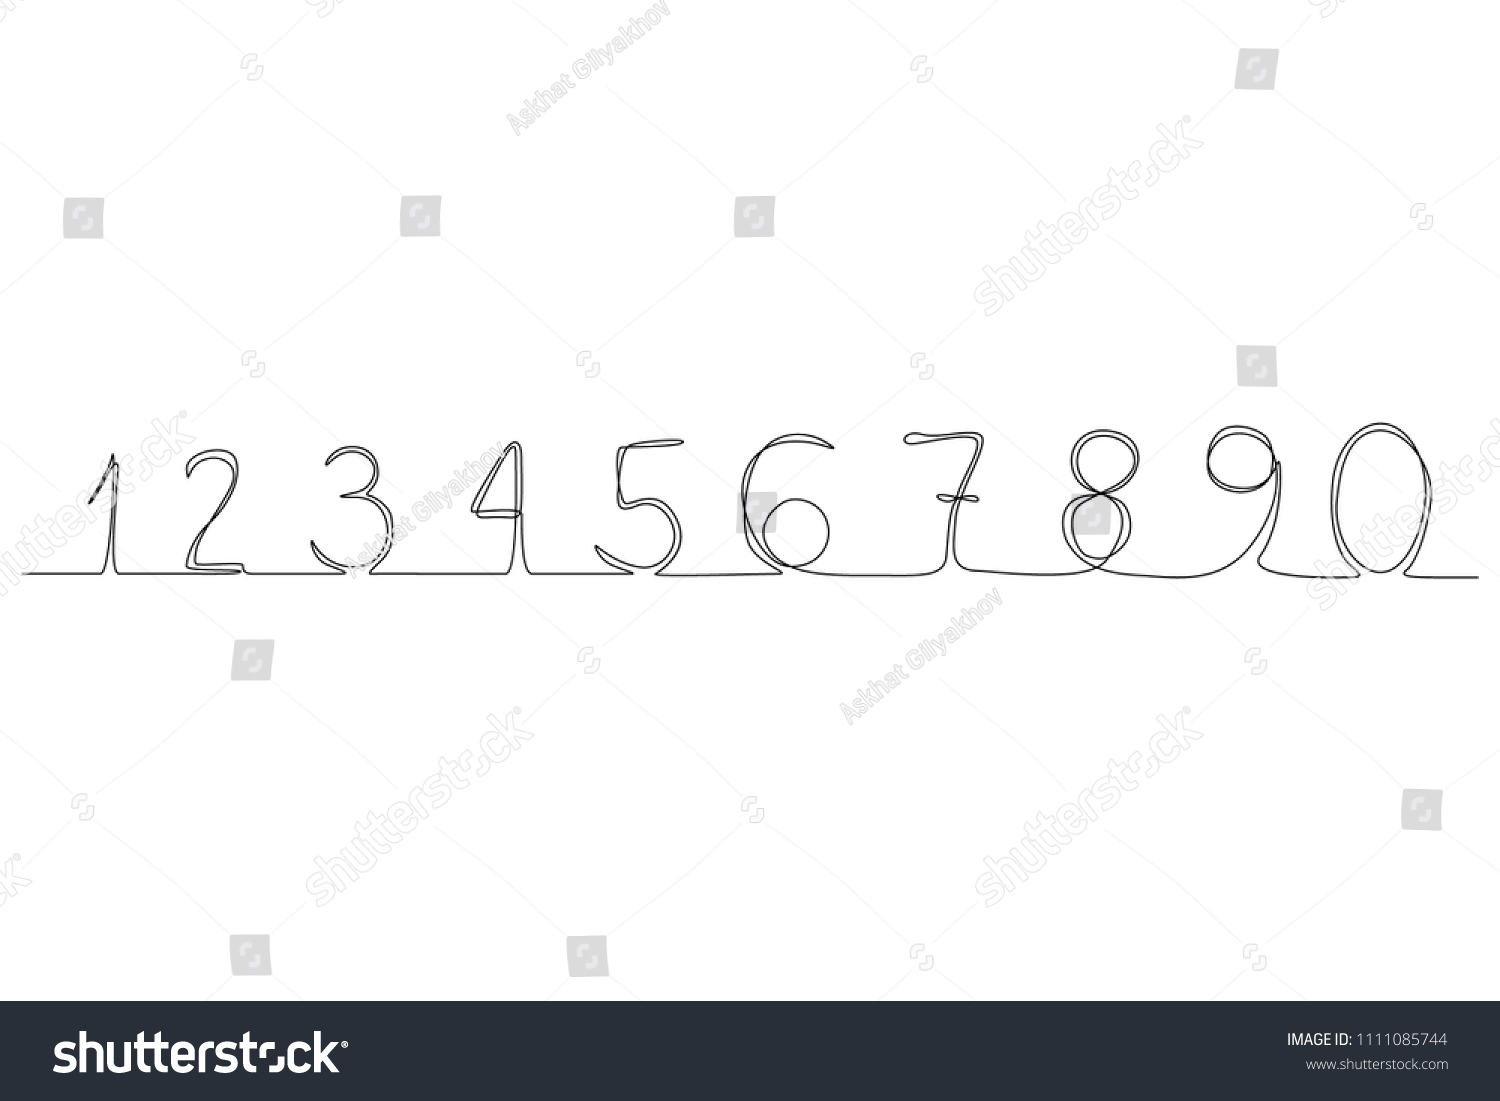 Continuous Line Numbers 09 New Minimalism Stock Vector (Royalty Free ...